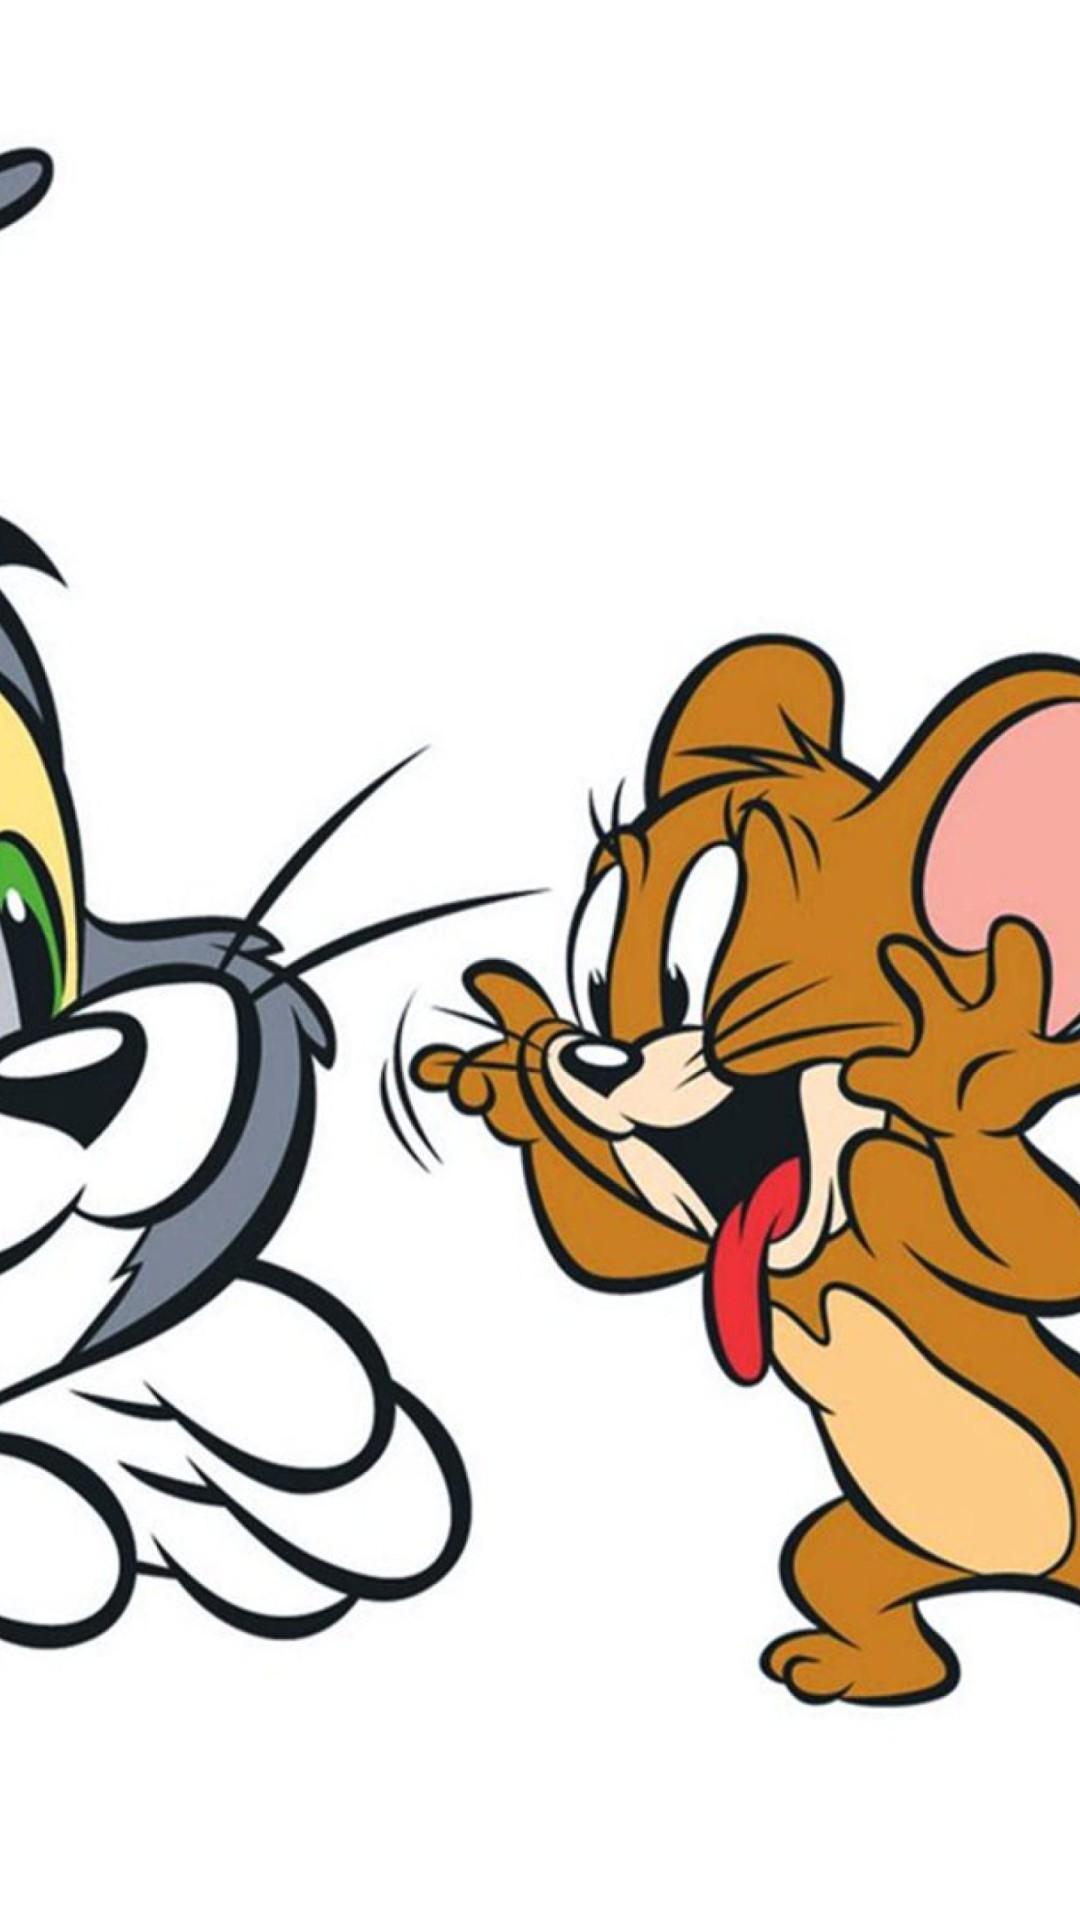 Tom and jerry hd mobile wallpapers